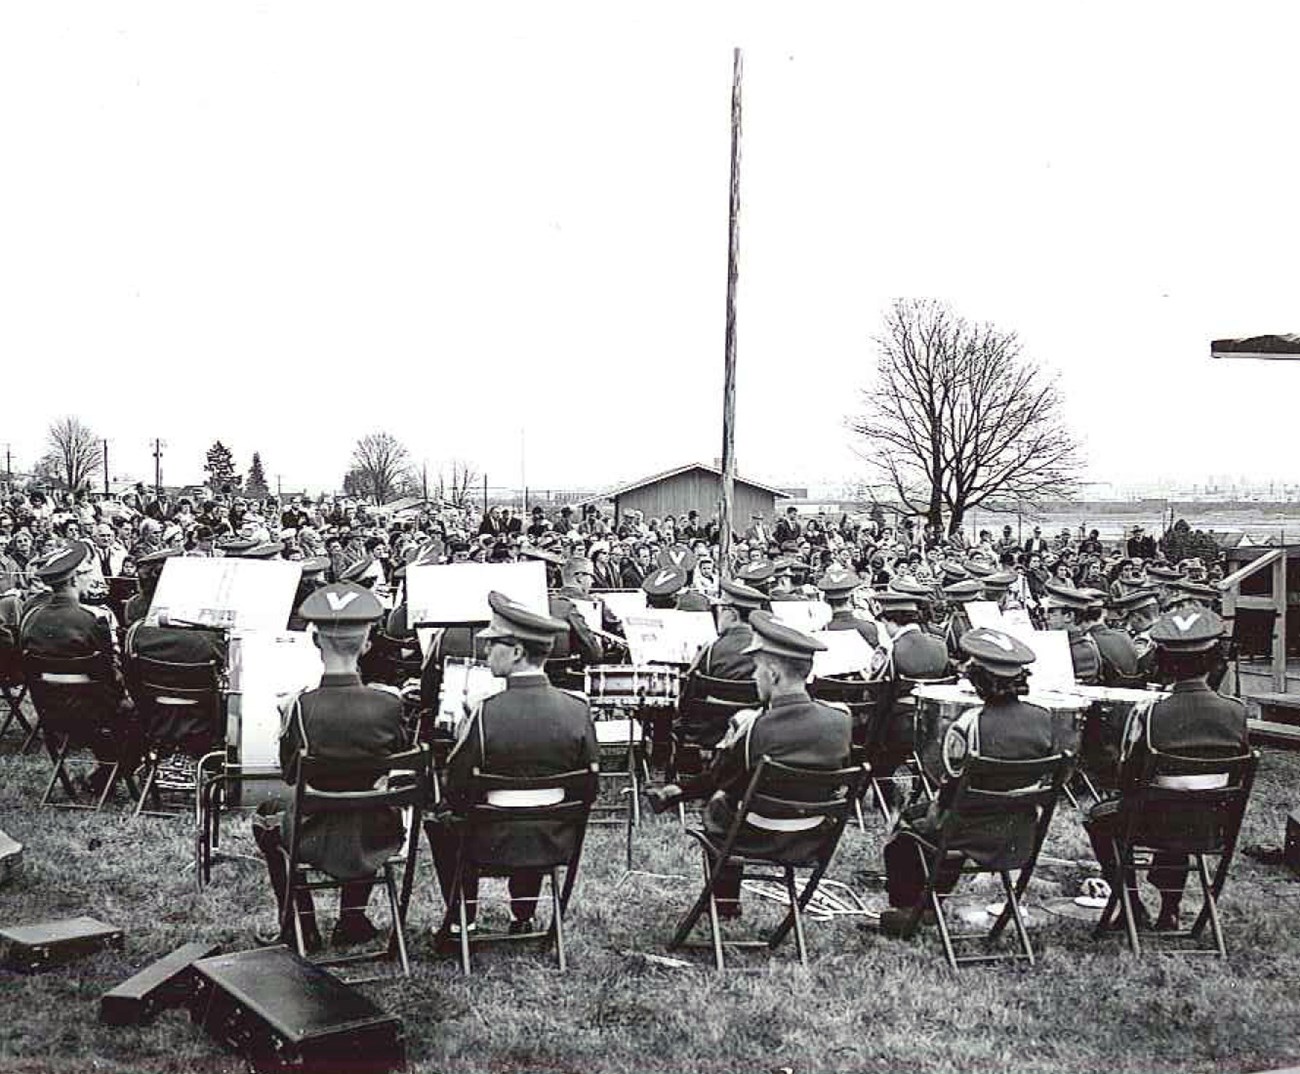 View of a band set up to play in front of a crowd at the dedication of the park's Visitor Center, 18 March 1962.